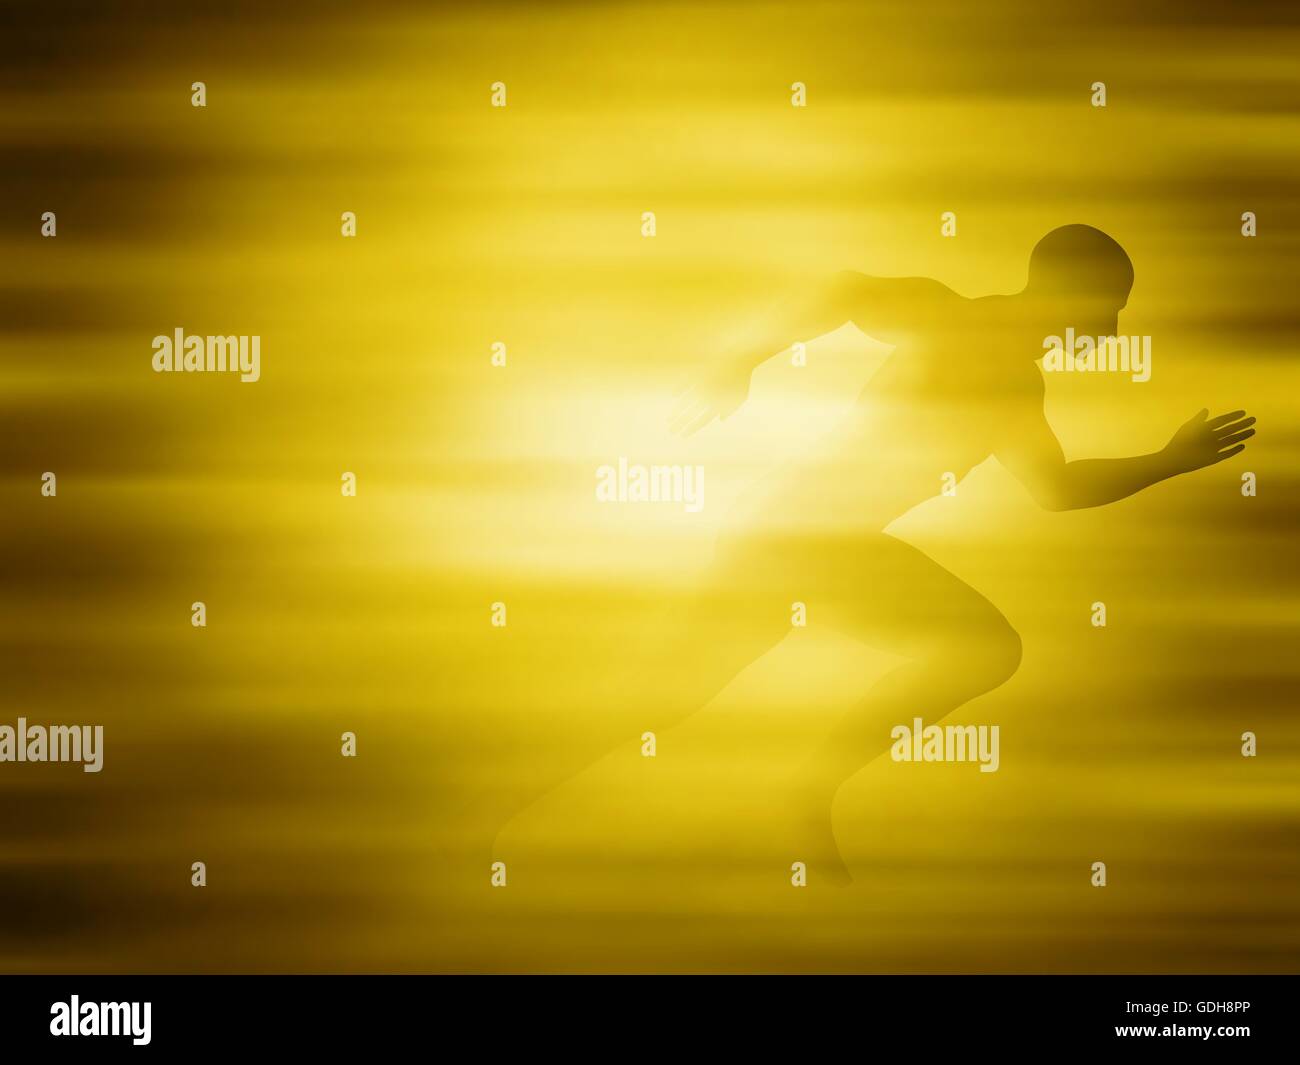 Editable vector illustration of a man sprinting in a golden blur created using gradient meshes Stock Vector